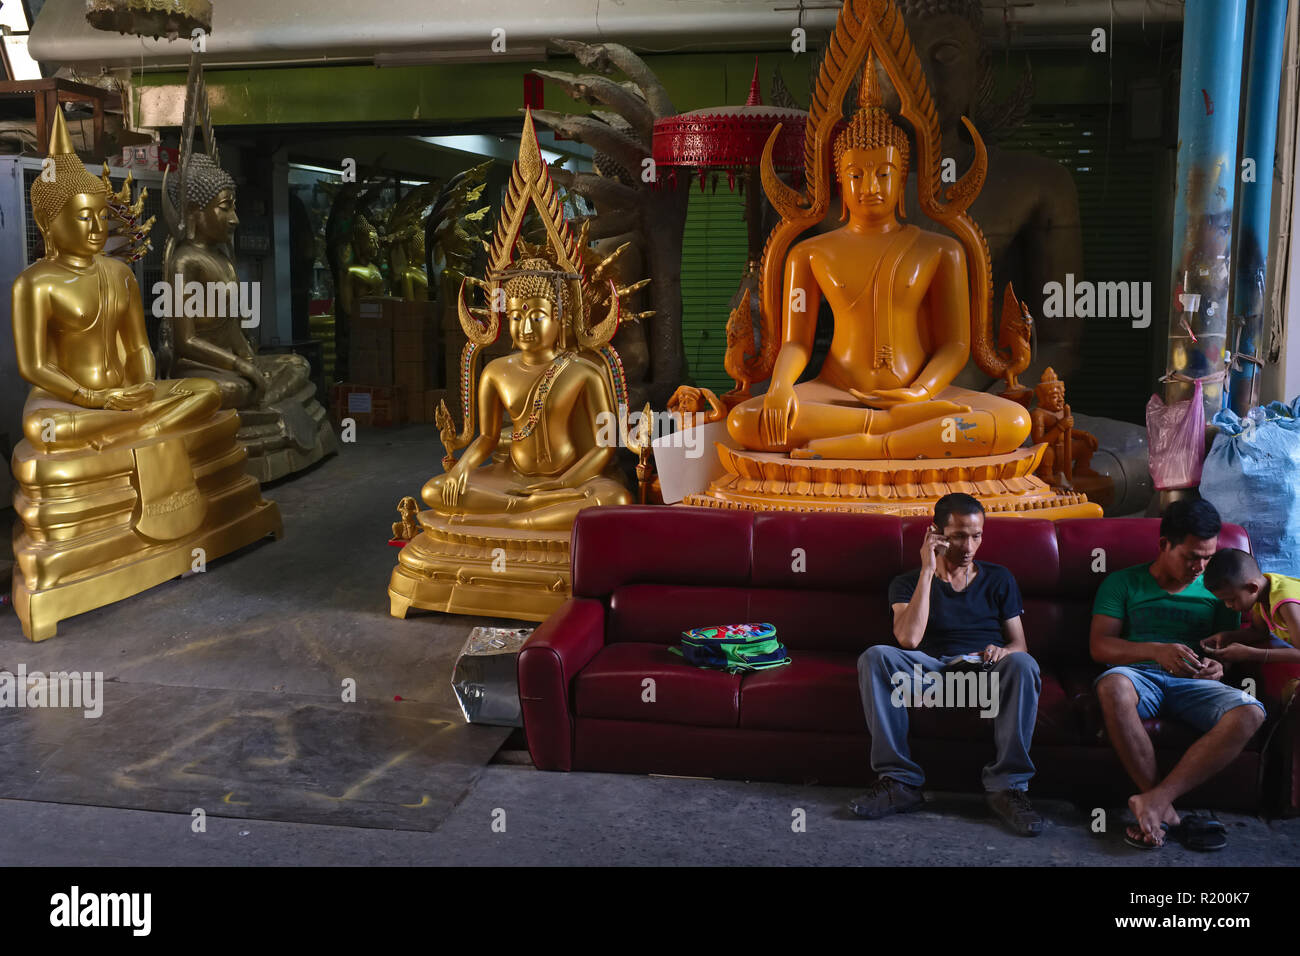 After working hours, workers and a child relax in a factory for Buddha statues and other religious objects in Bamrung Muang Road., Bangkok, Thailand Stock Photo